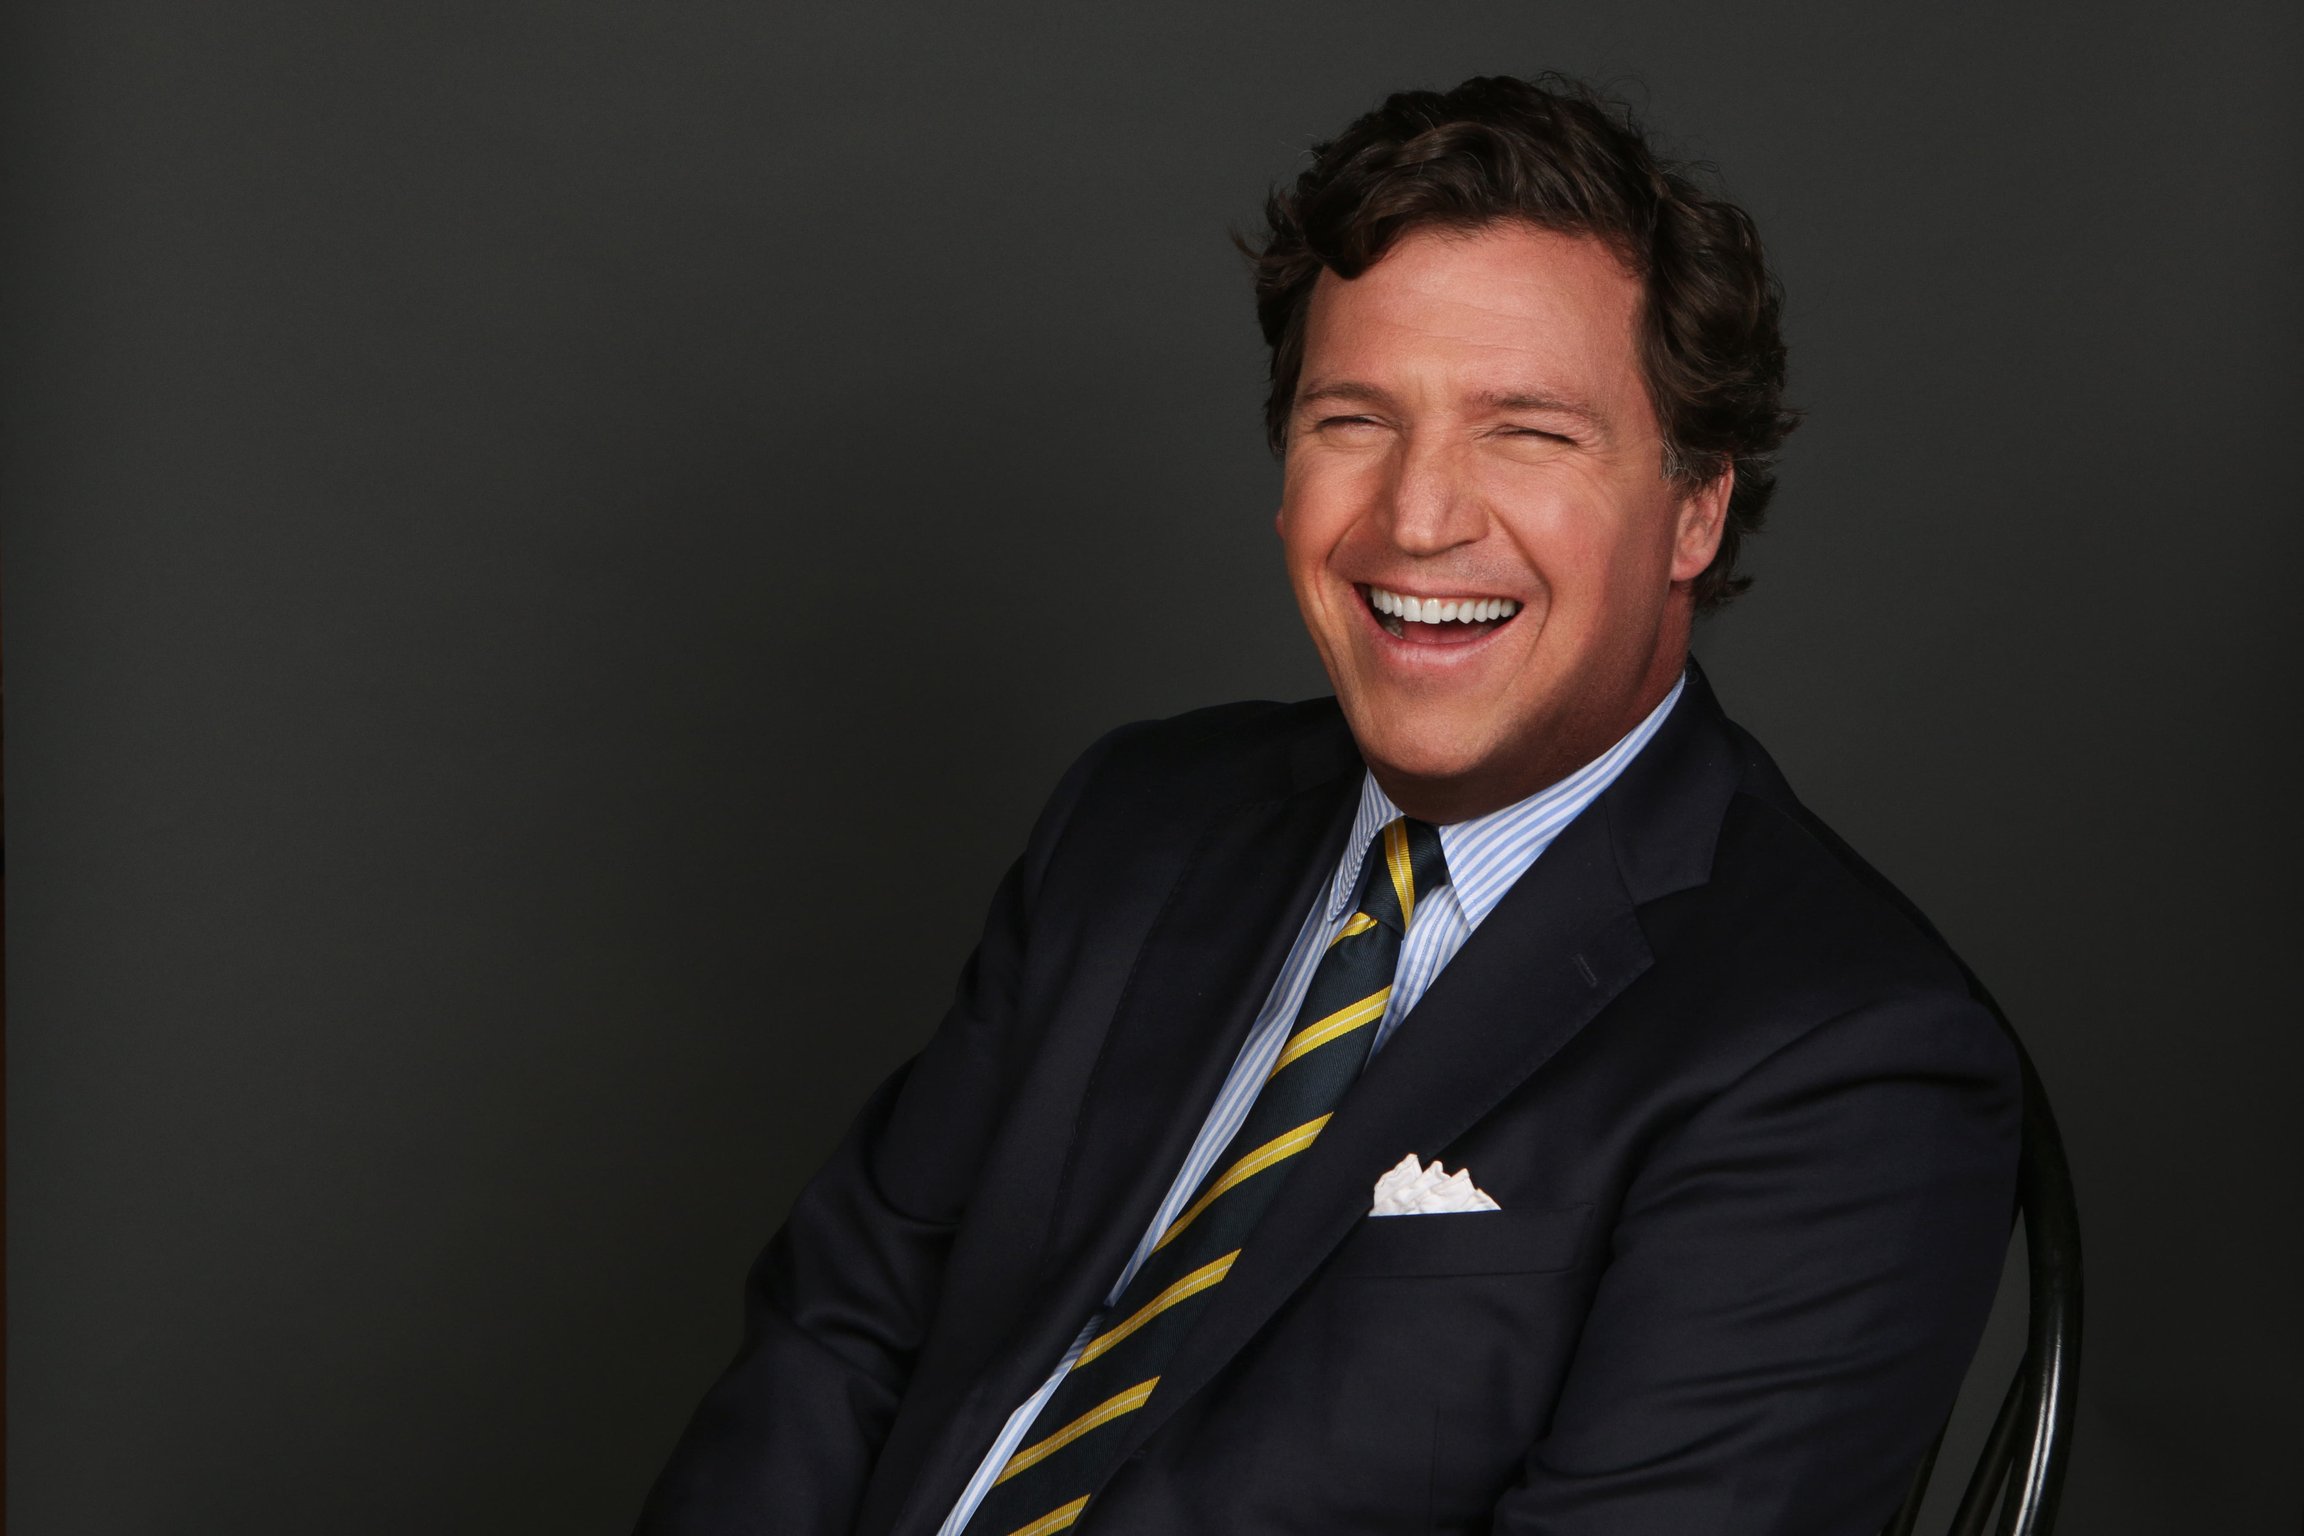 A photo of Tucker Carlson smiling